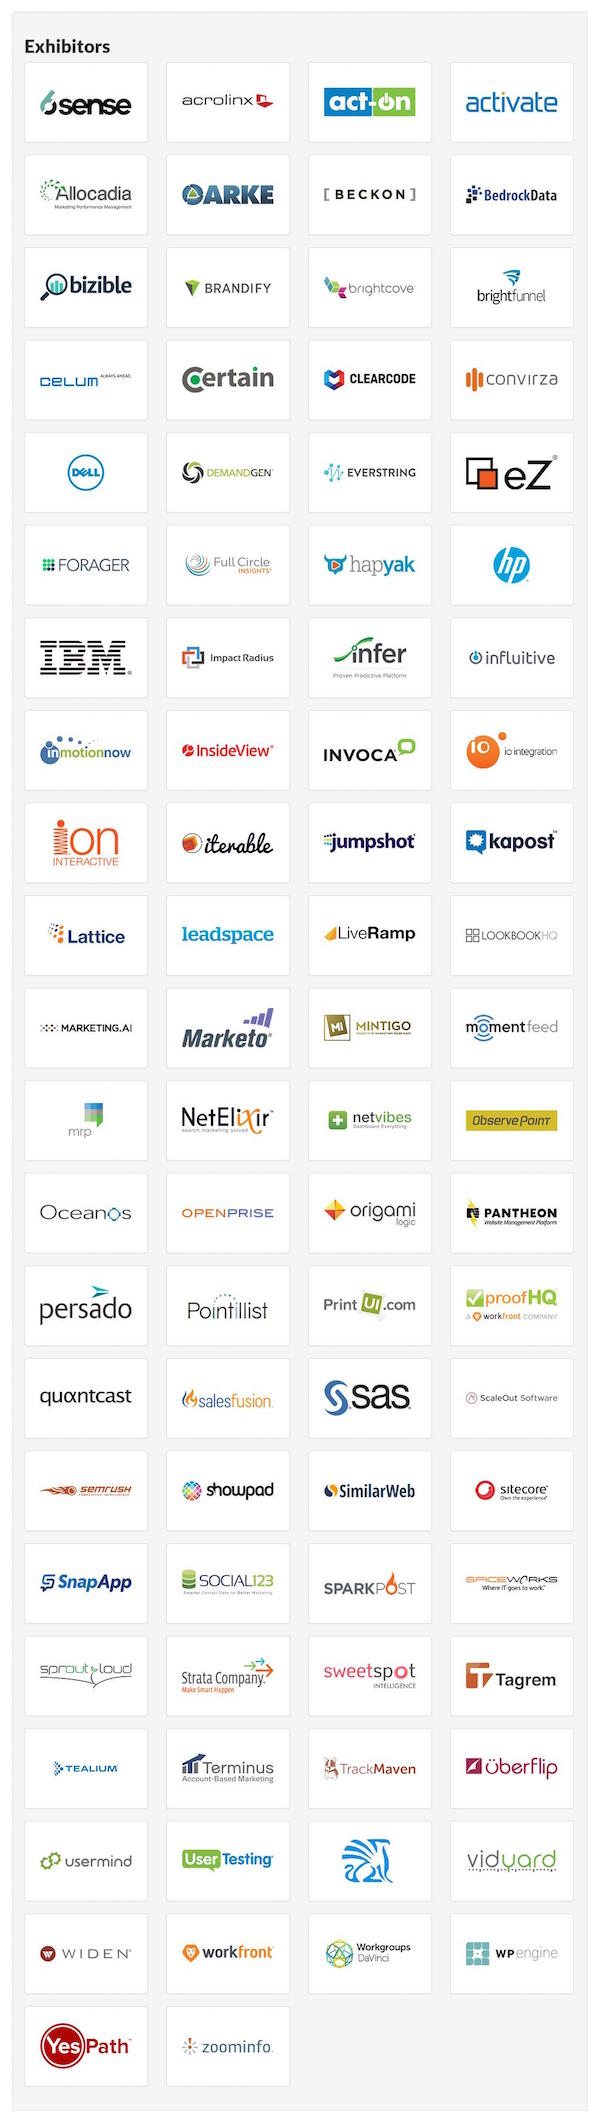 MarTech Exhibitors for March 2015